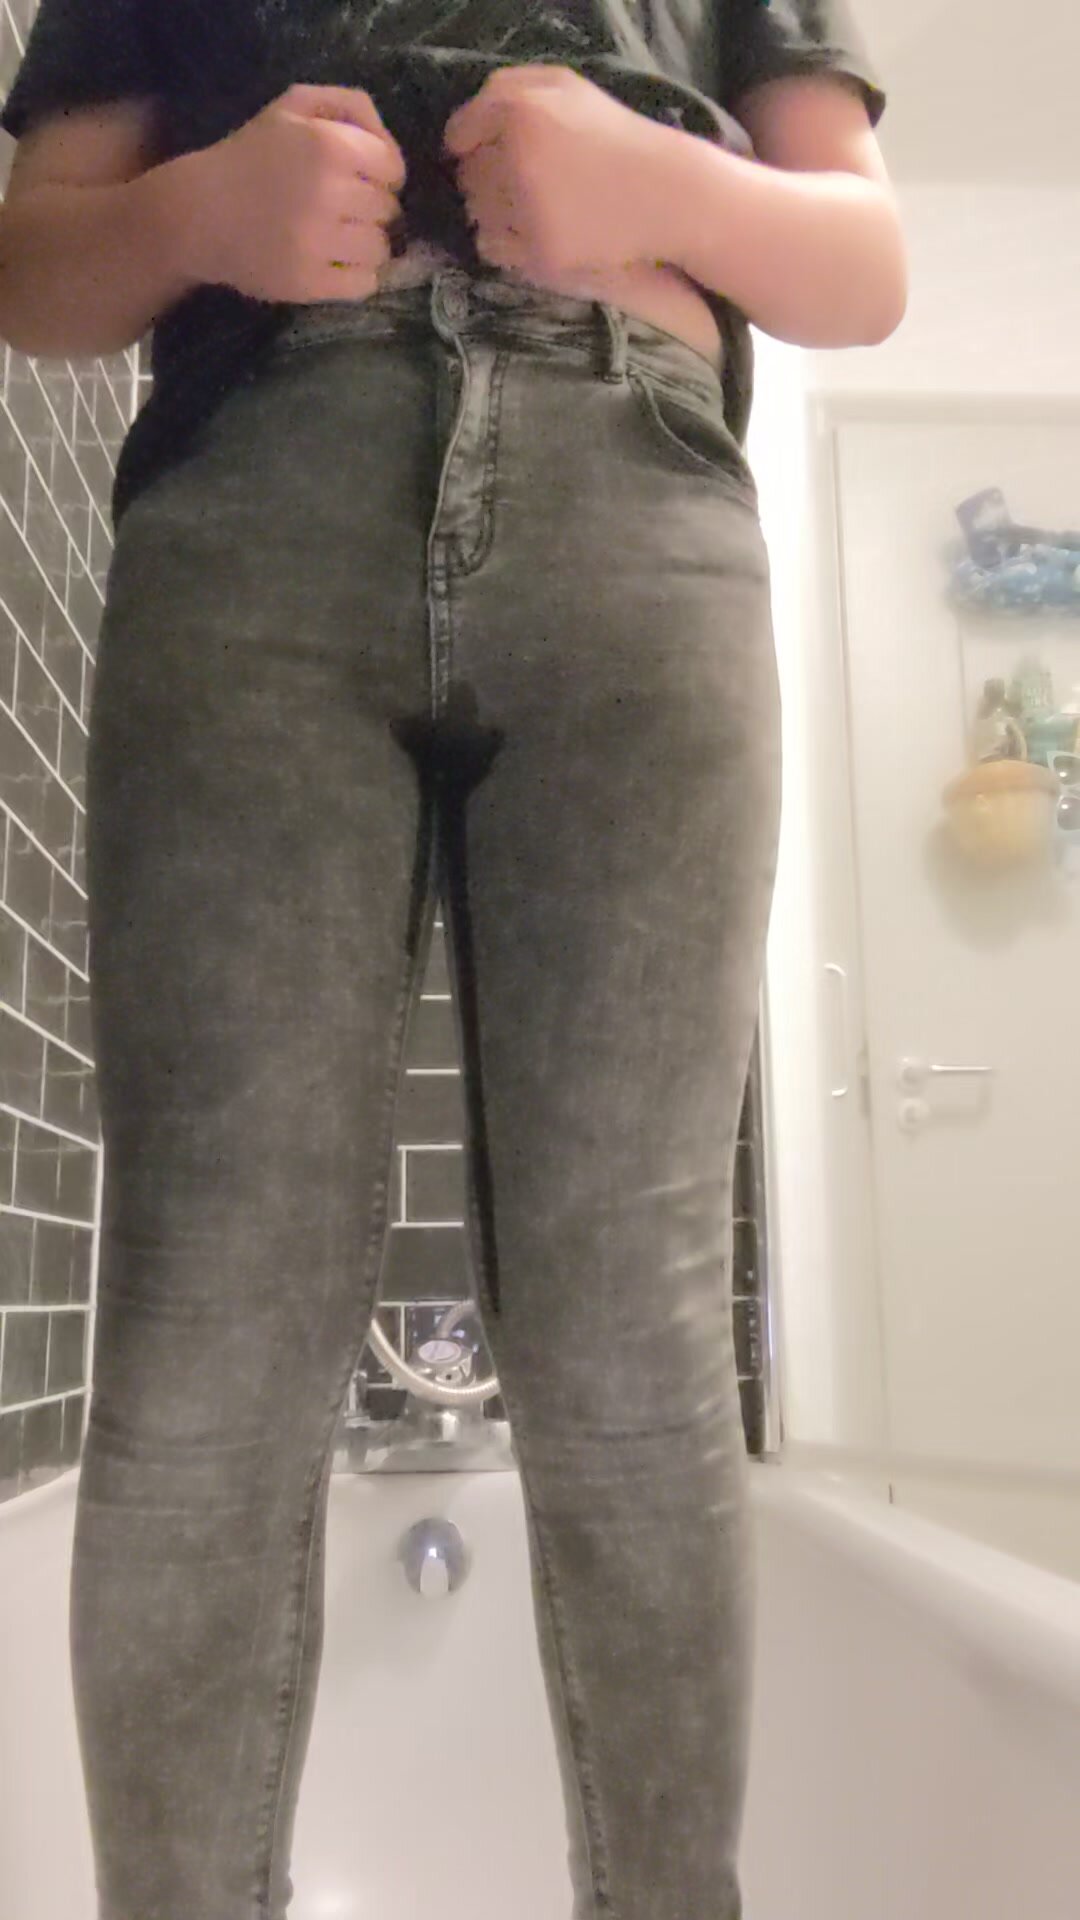 Chubby Tgirl pisses jeans